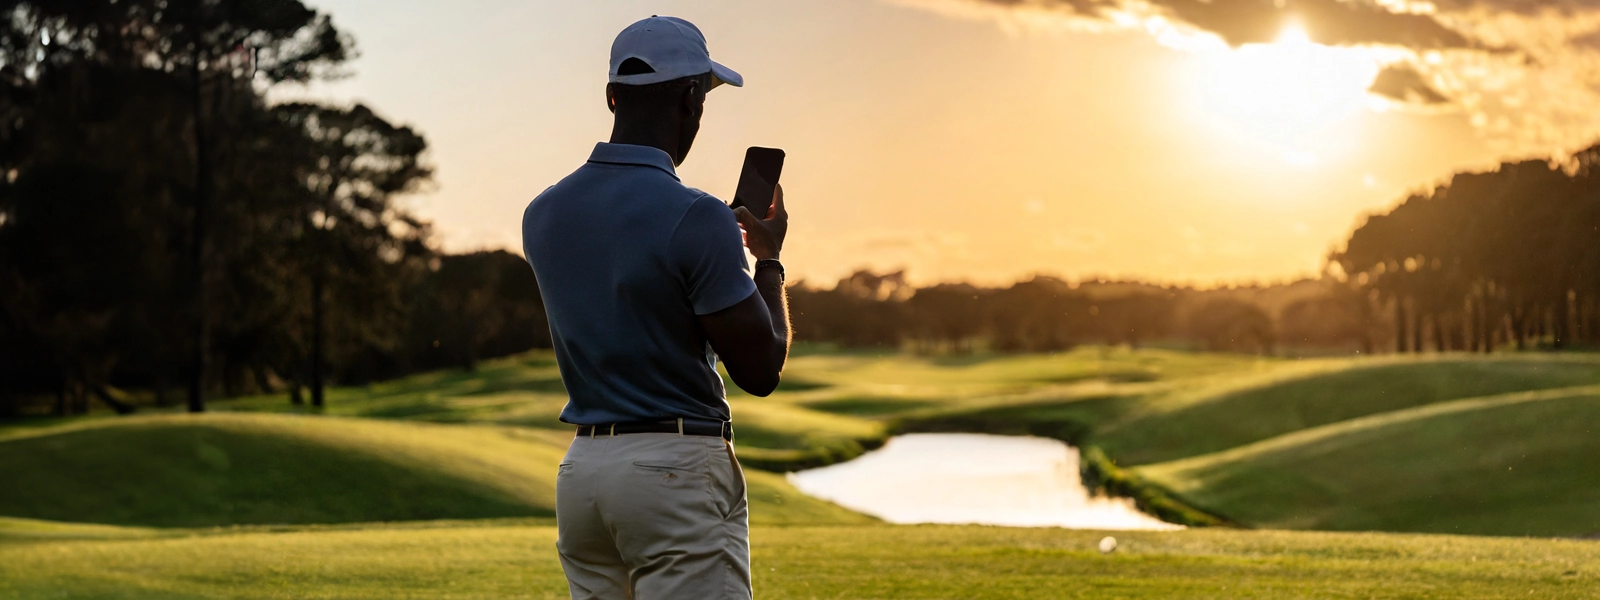 Man on a golf course, back to the camera on his phone, sunrise in the background